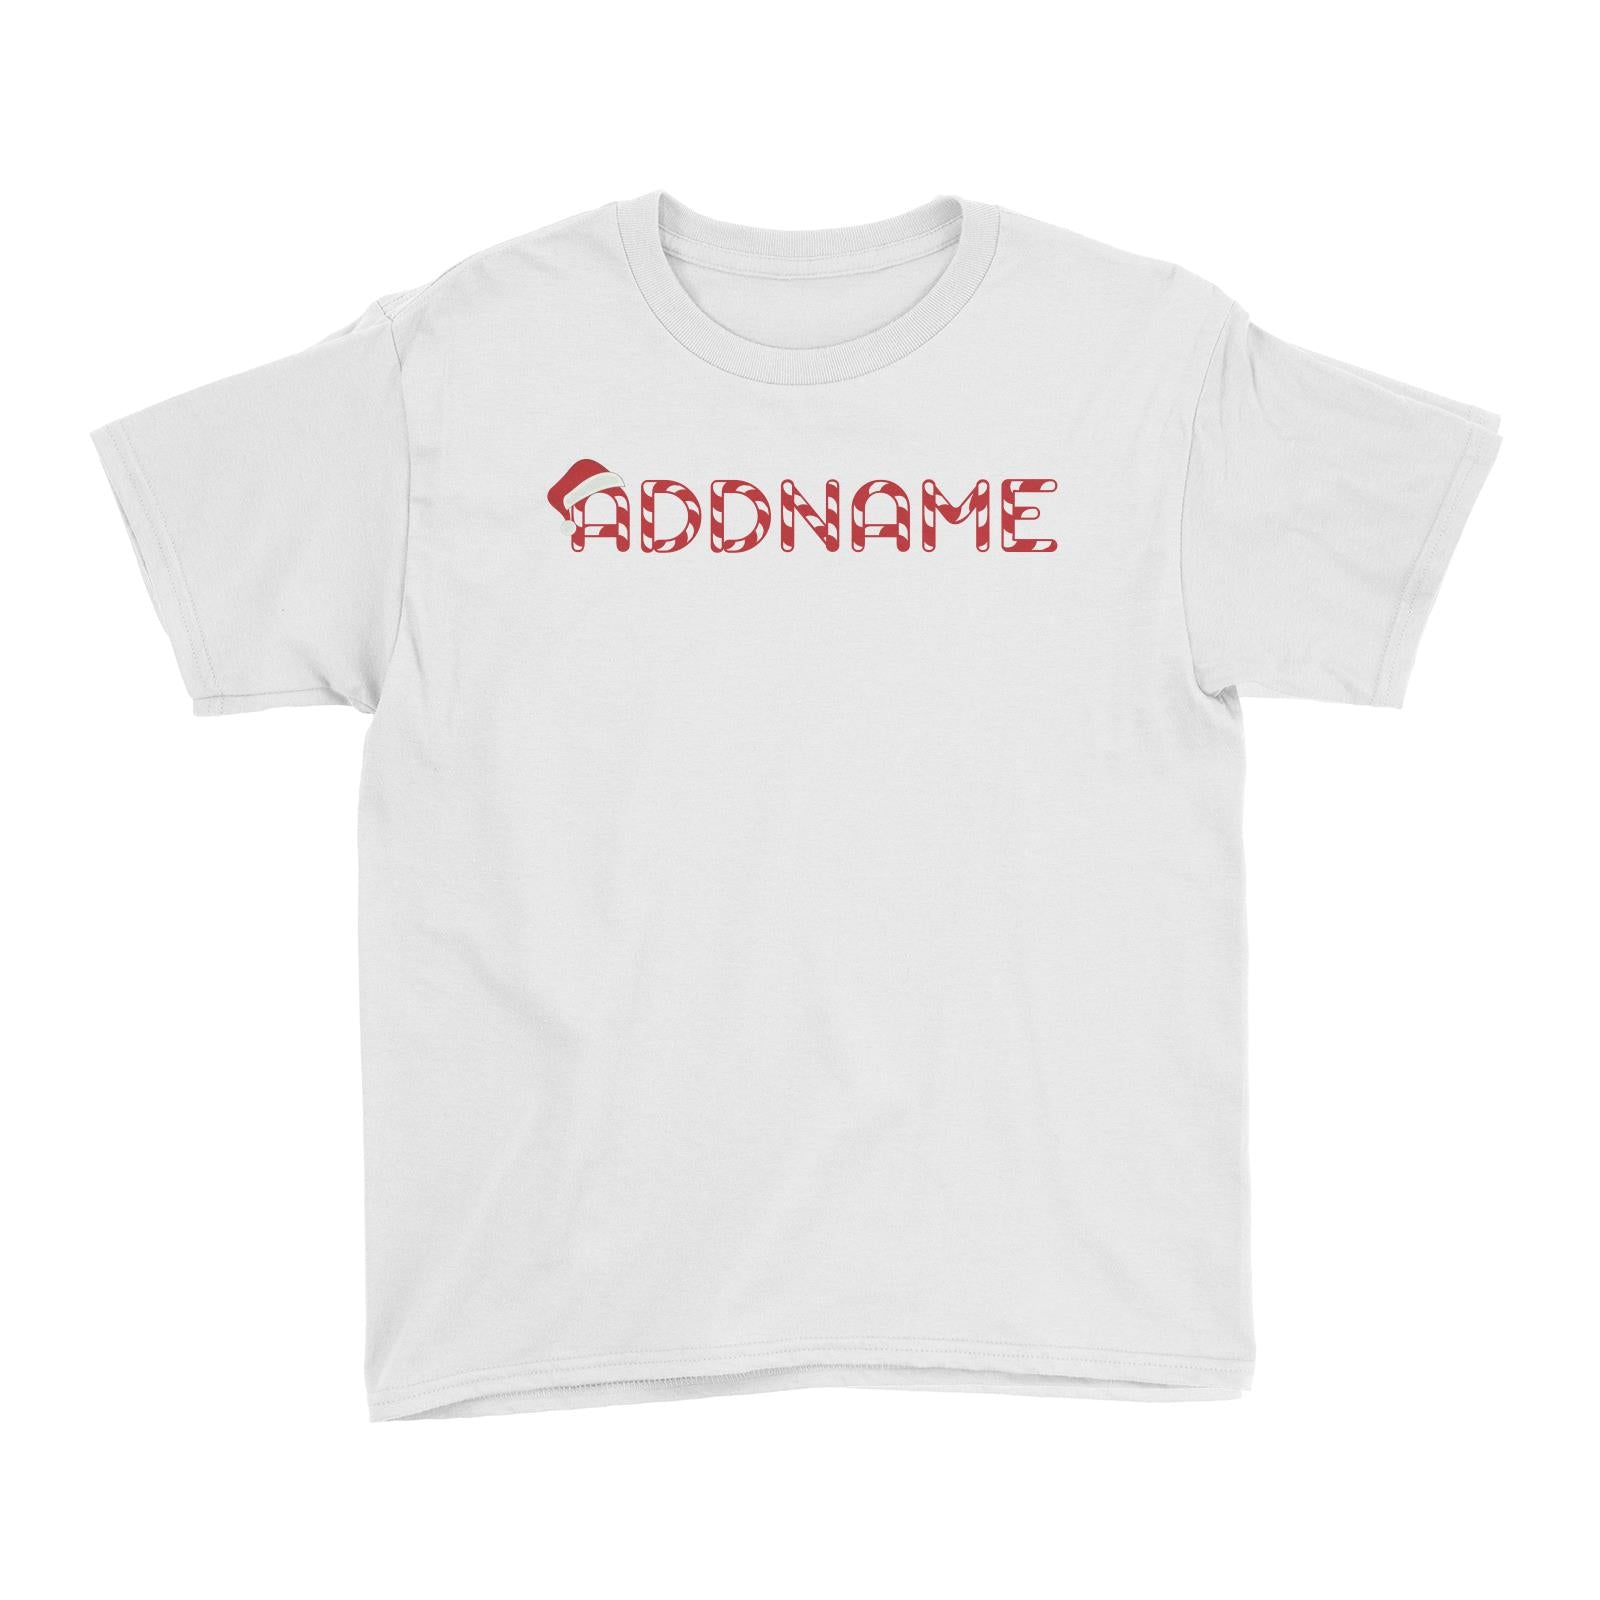 Candy Cane Alphabet Addname with Santa Hat Kid's T-Shirt Christmas Matching Family Personalizable Designs Lettering